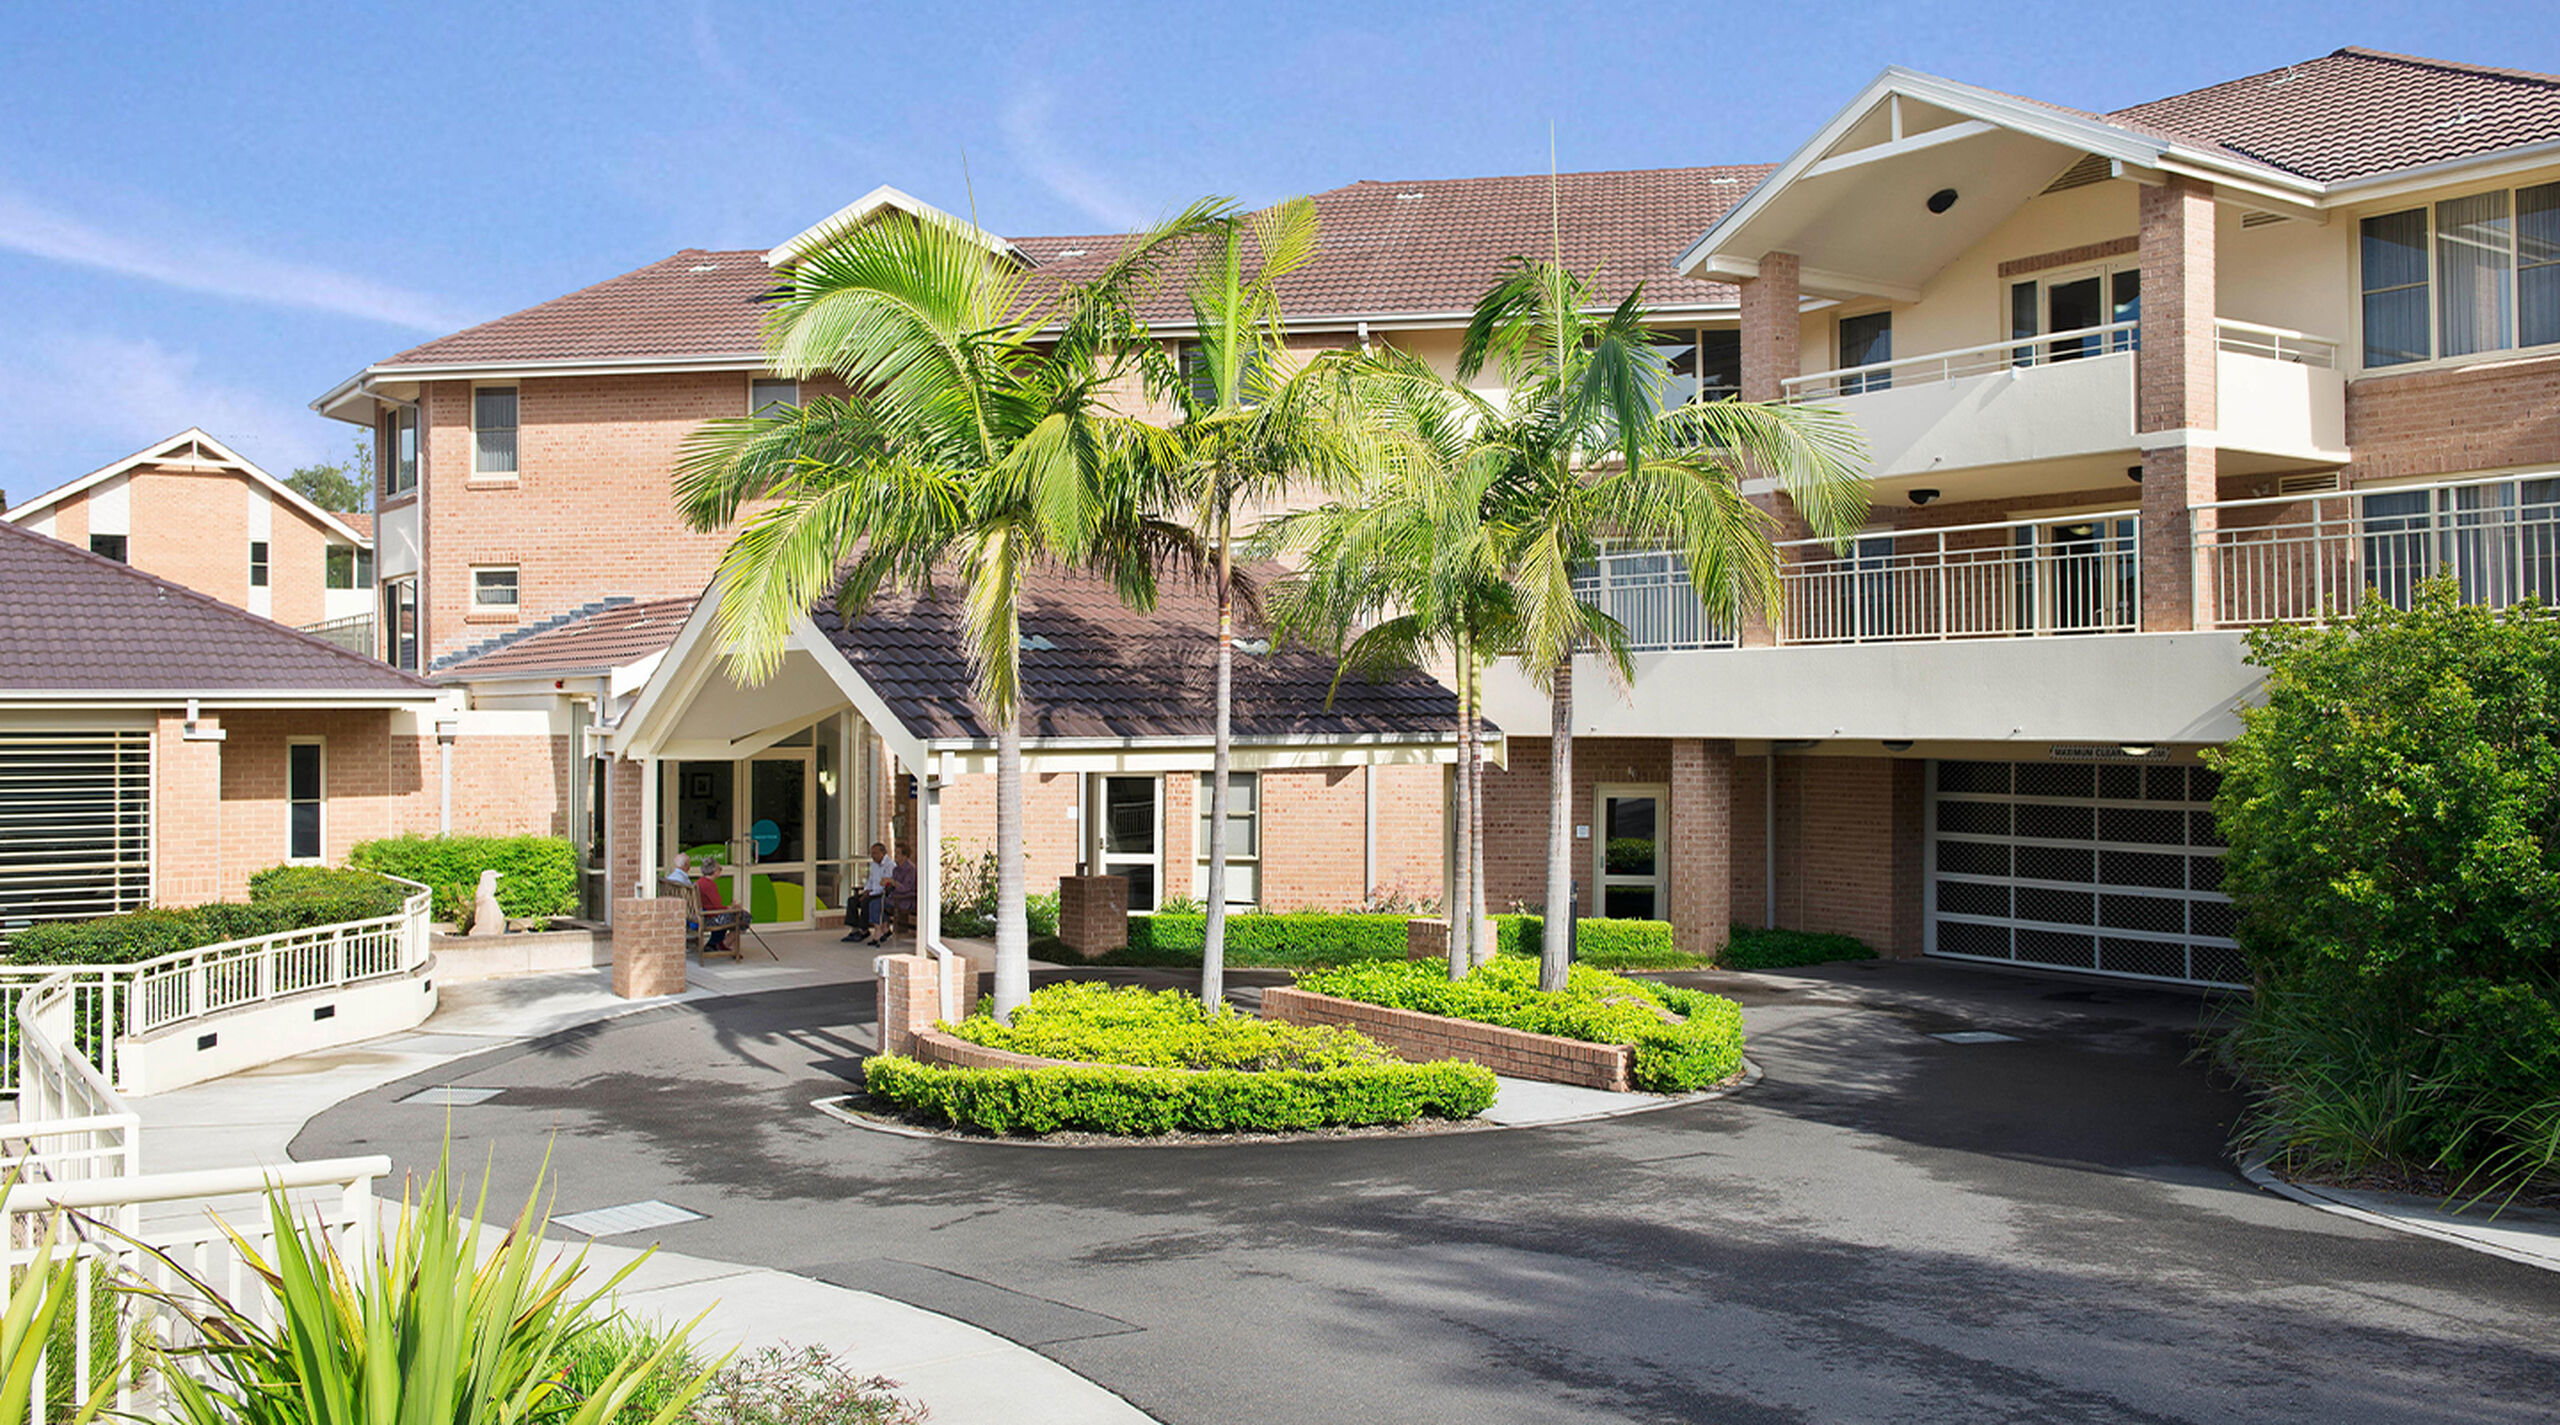 baptistcare warena centre modern aged care home with long driveway and footpath lined with beautiful gardens in bangor aged care in sutherland shire nsw